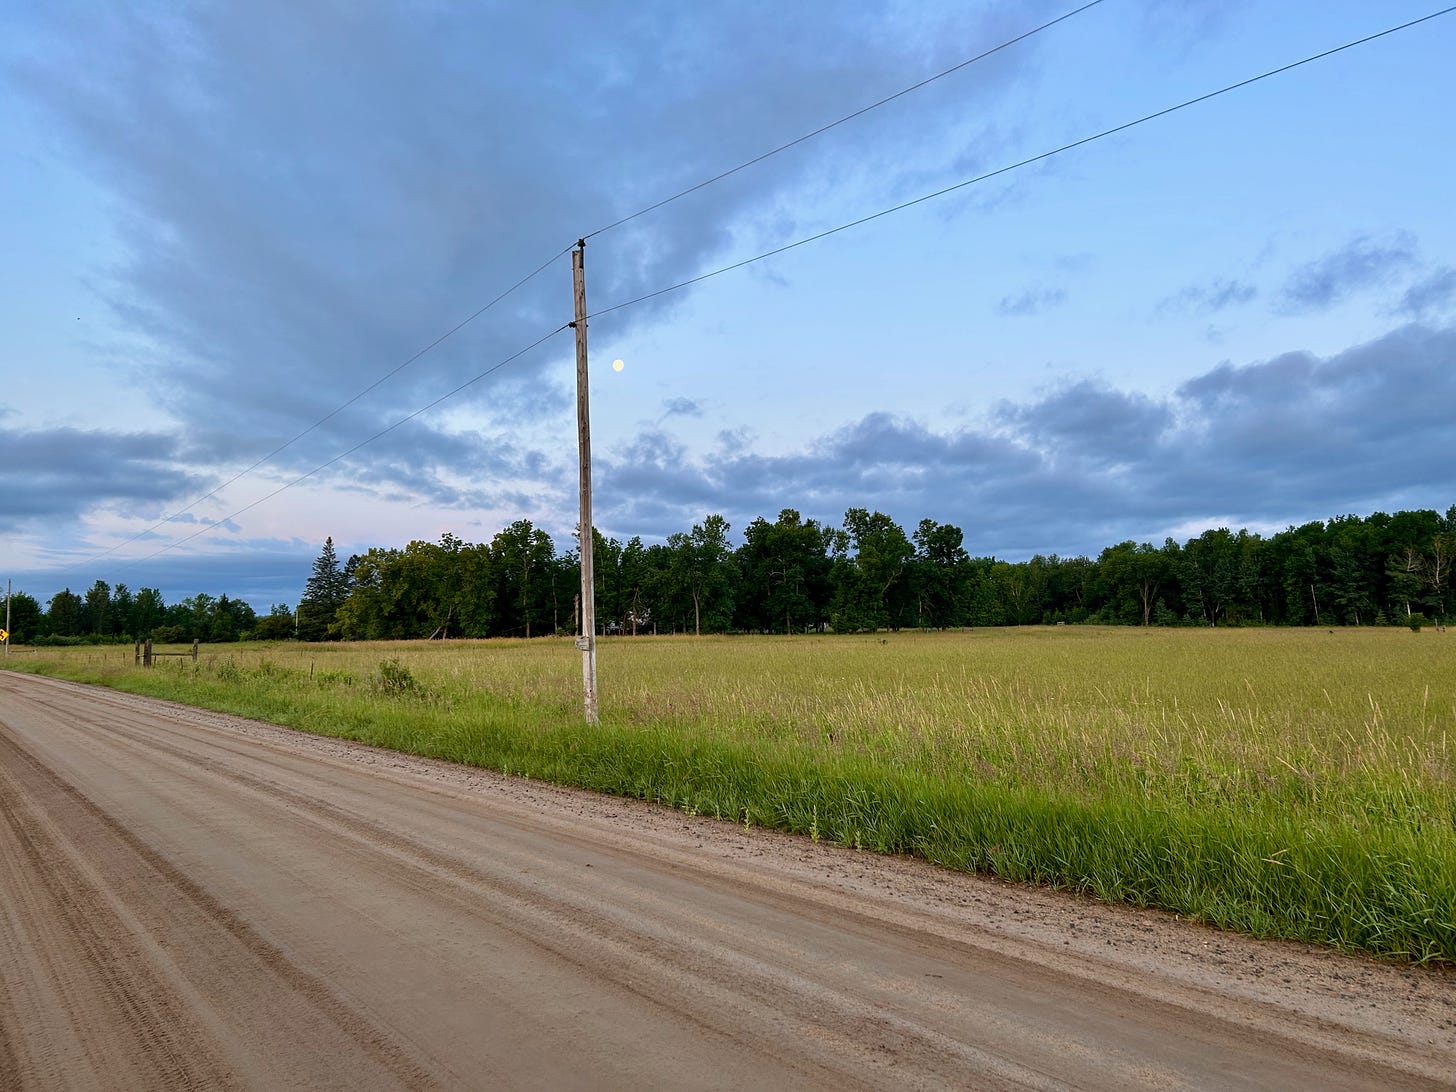 A photograph of a dirt road in the country on a beautiful morning at dawn